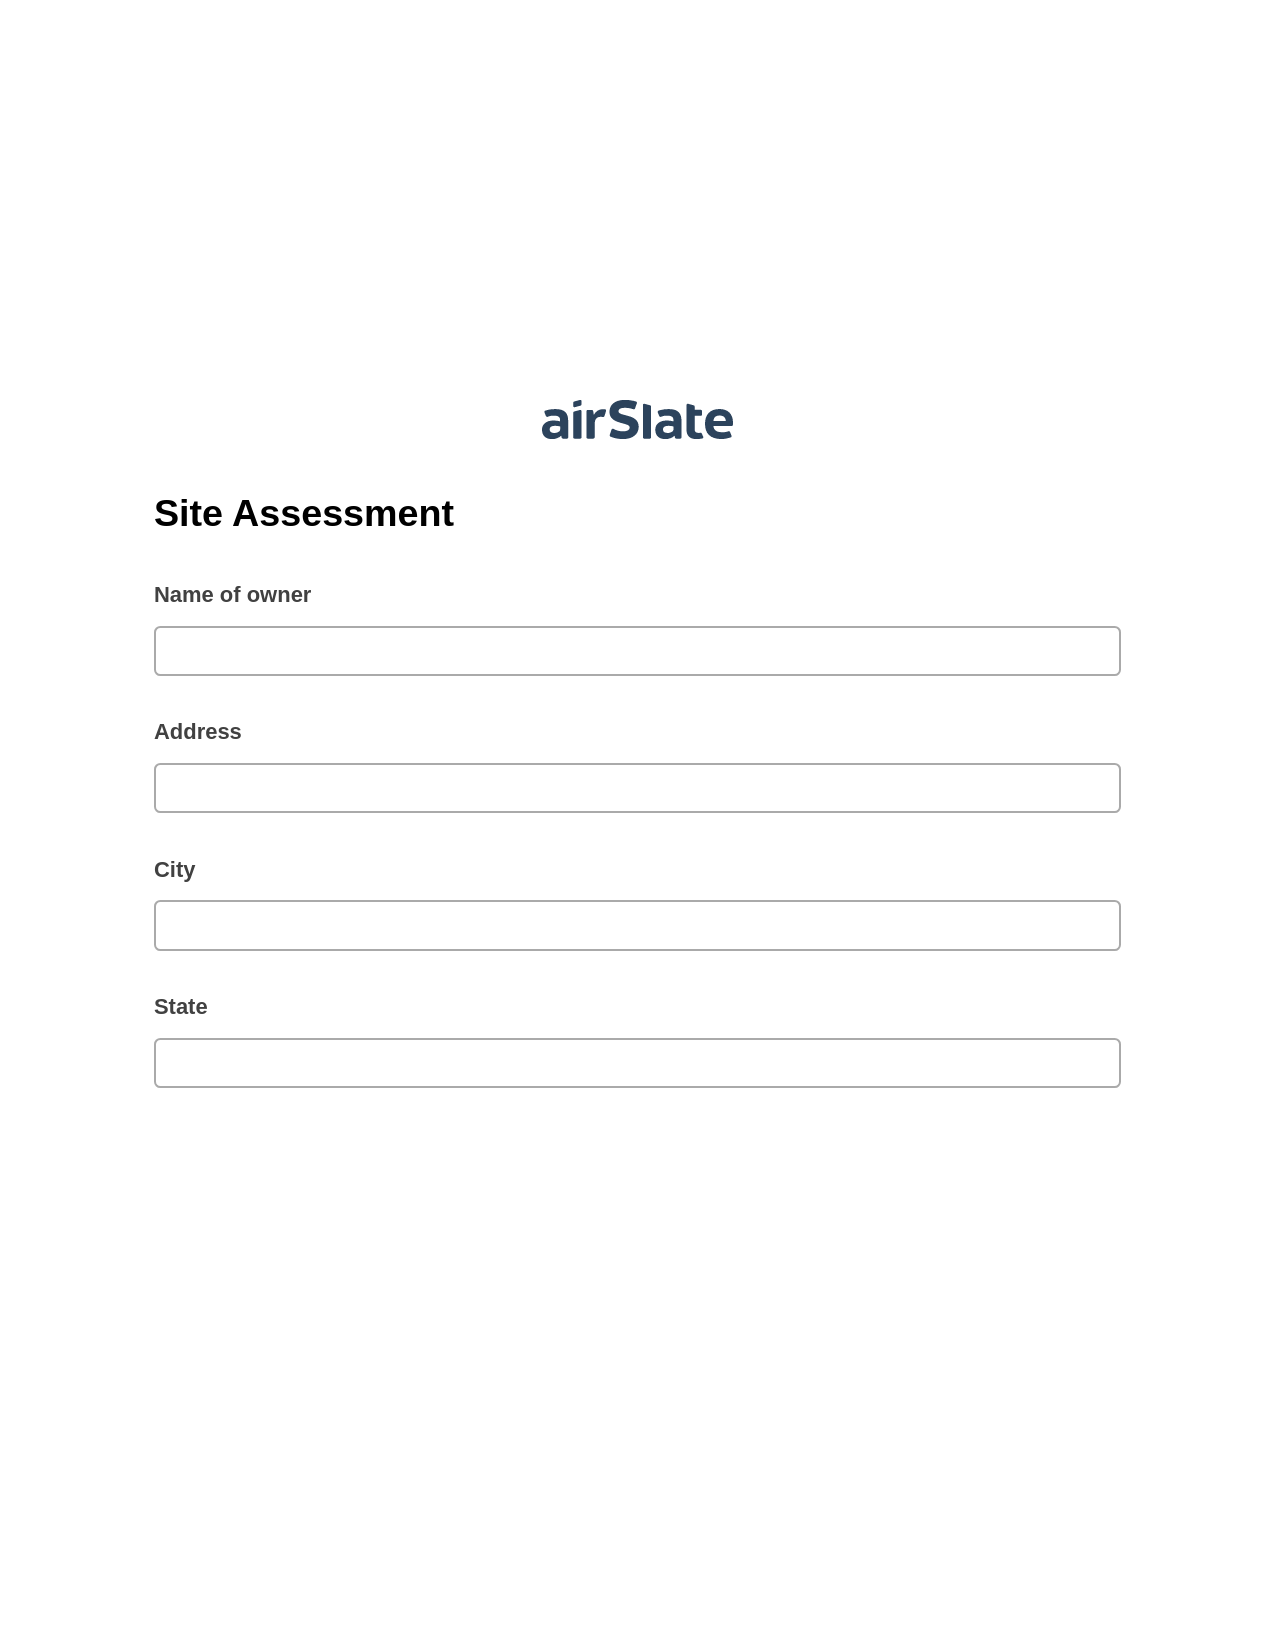 Multirole Site Assessment Pre-fill from CSV File Bot, Unassign Role Bot, Export to Salesforce Bot